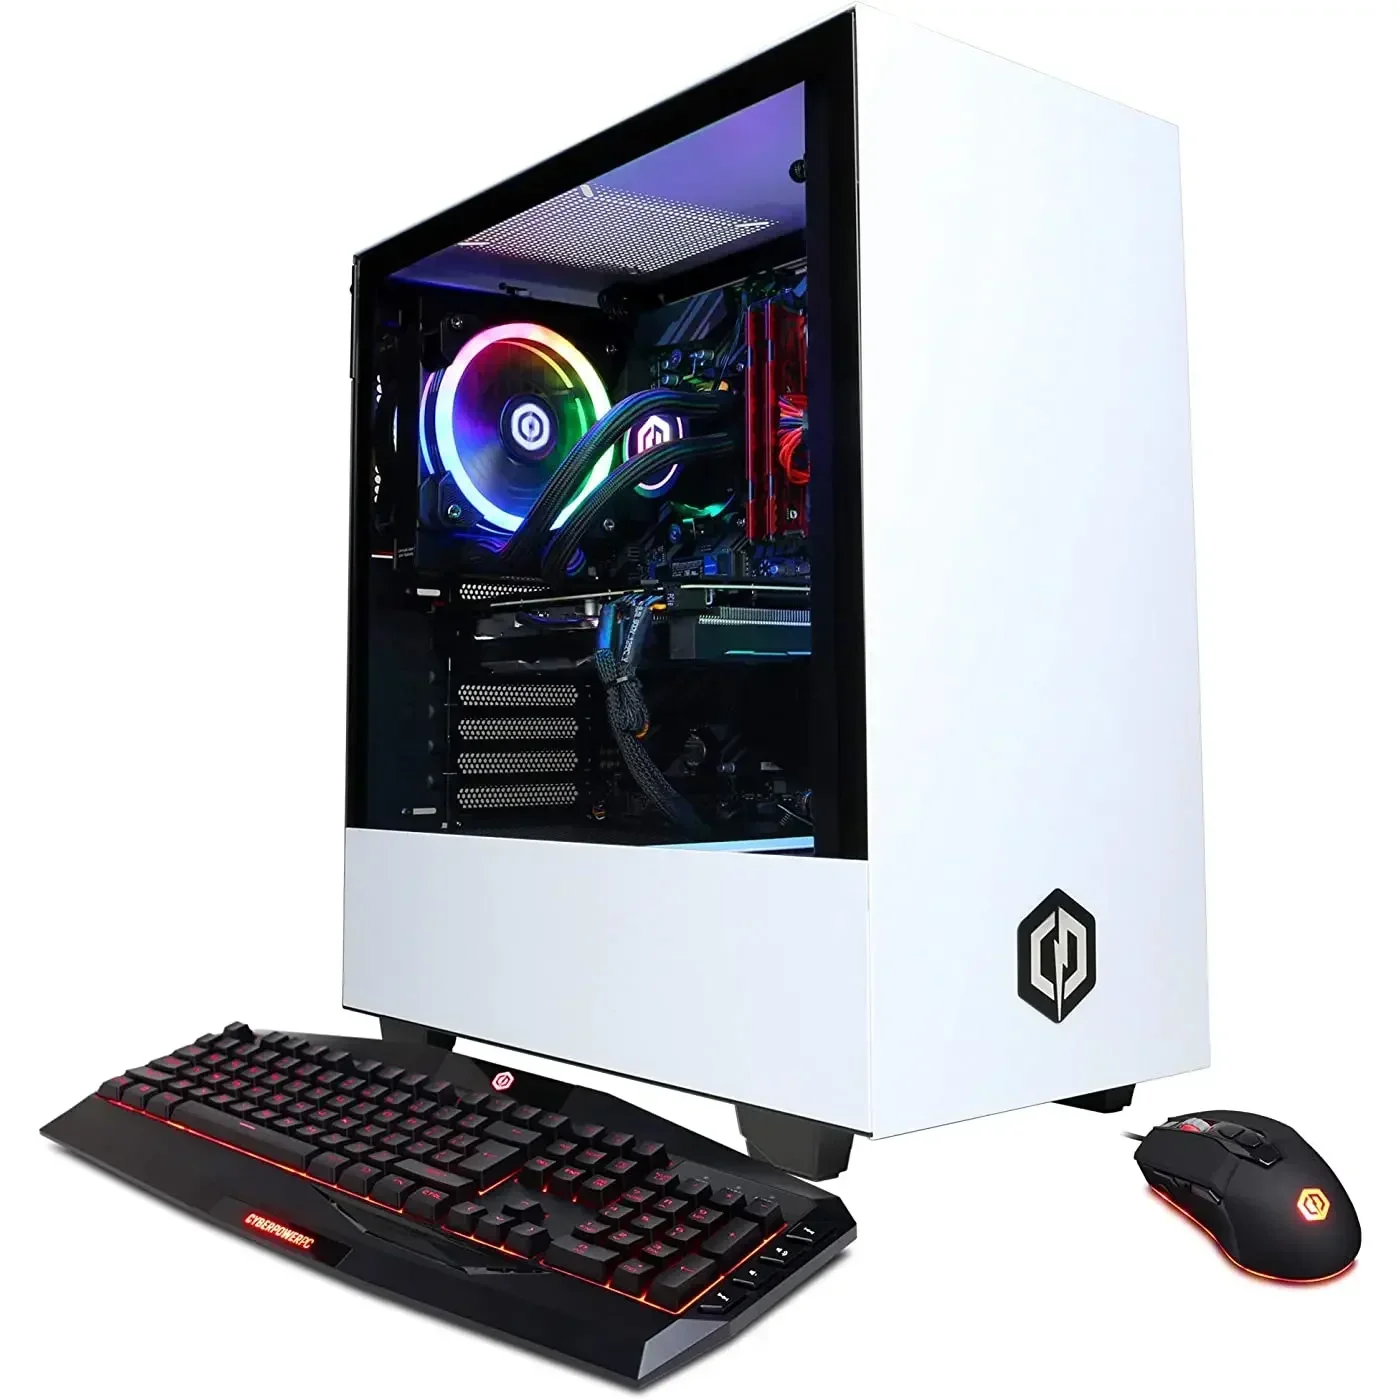 

SUMMER SALES DISCOUNT ON AUTHENTIC CYBERPOWER PC Sup reme Liquid Cool Gaming PC AMD Ry zen 9 3900X 3.8GHz, AMD Radeon RX 6700 XT